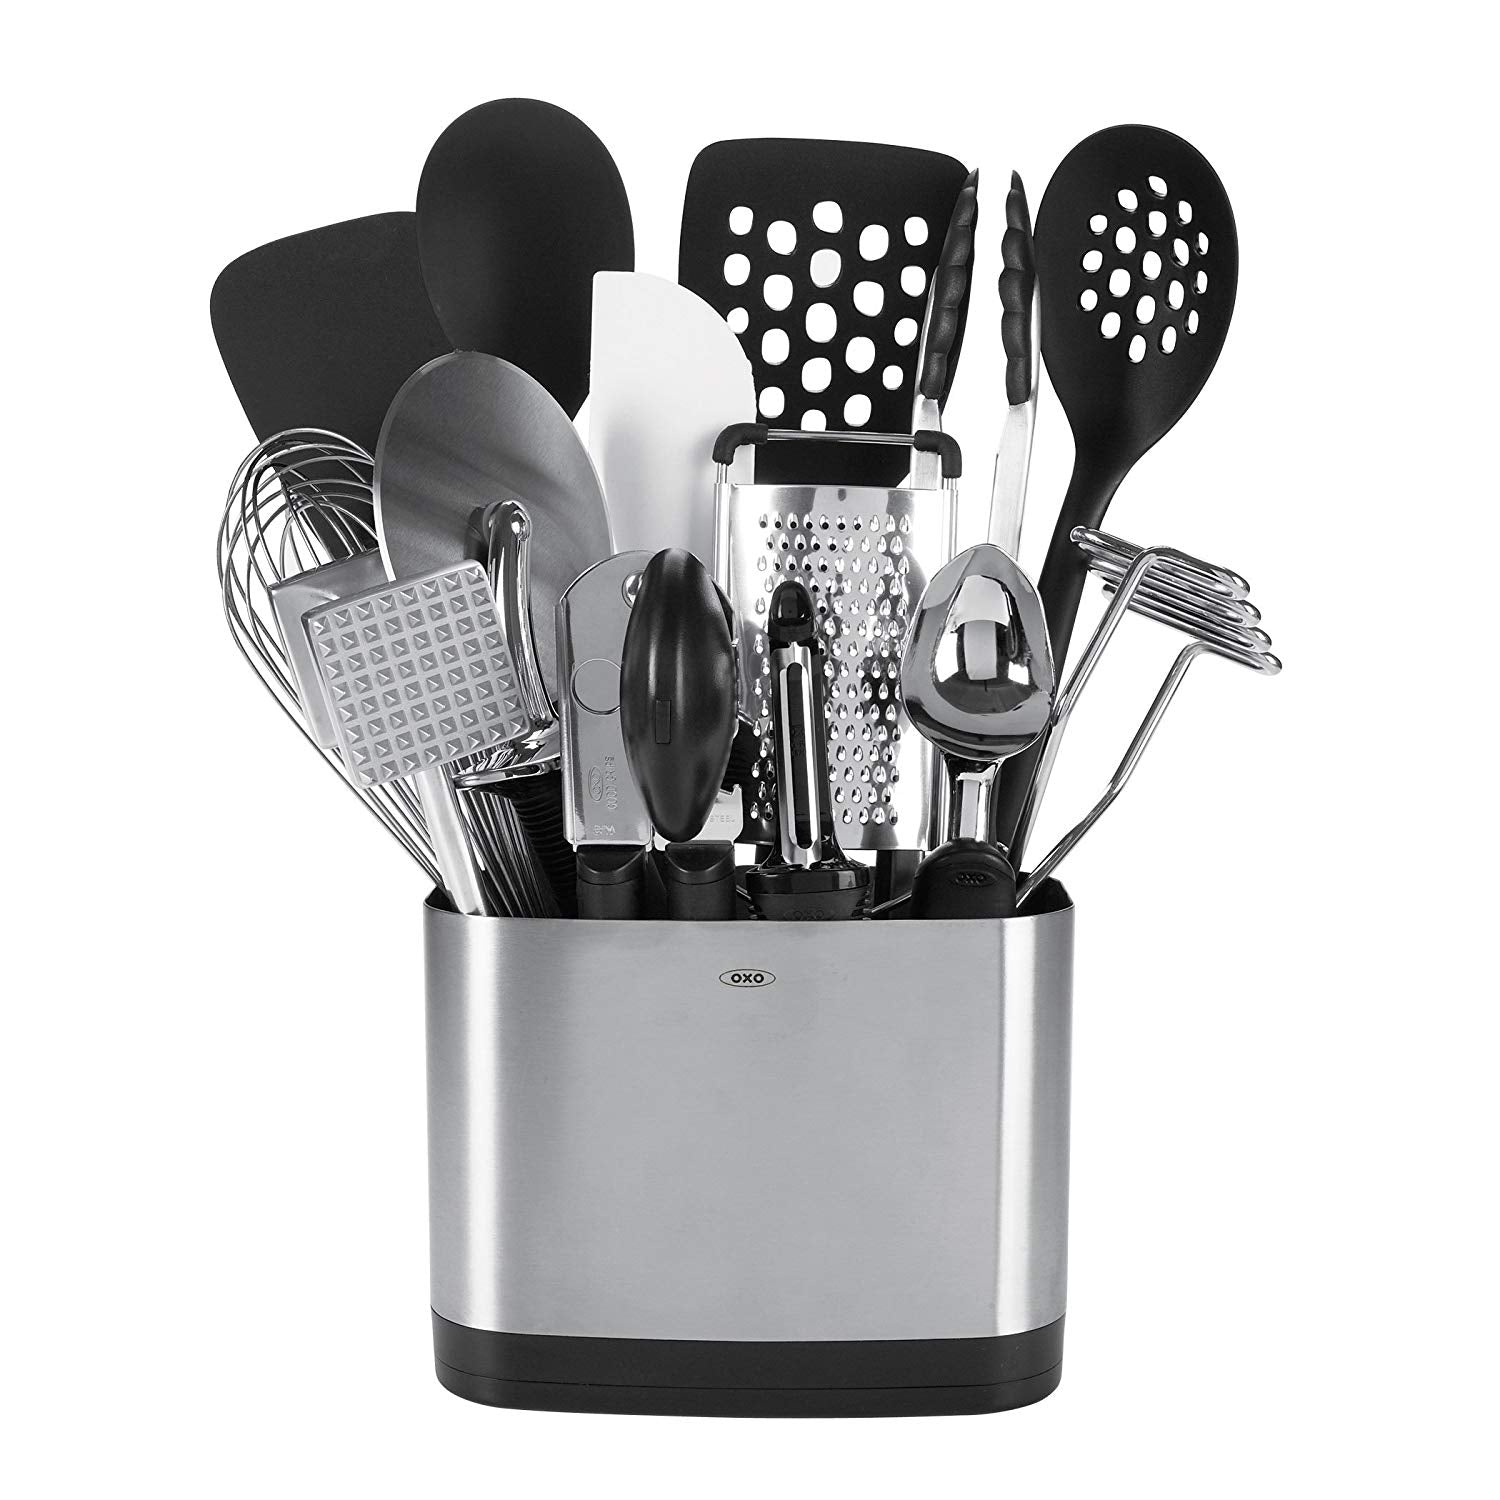 OXO 3114600 Good Grips 15-Piece Everyday Kitchen Tool Set - The